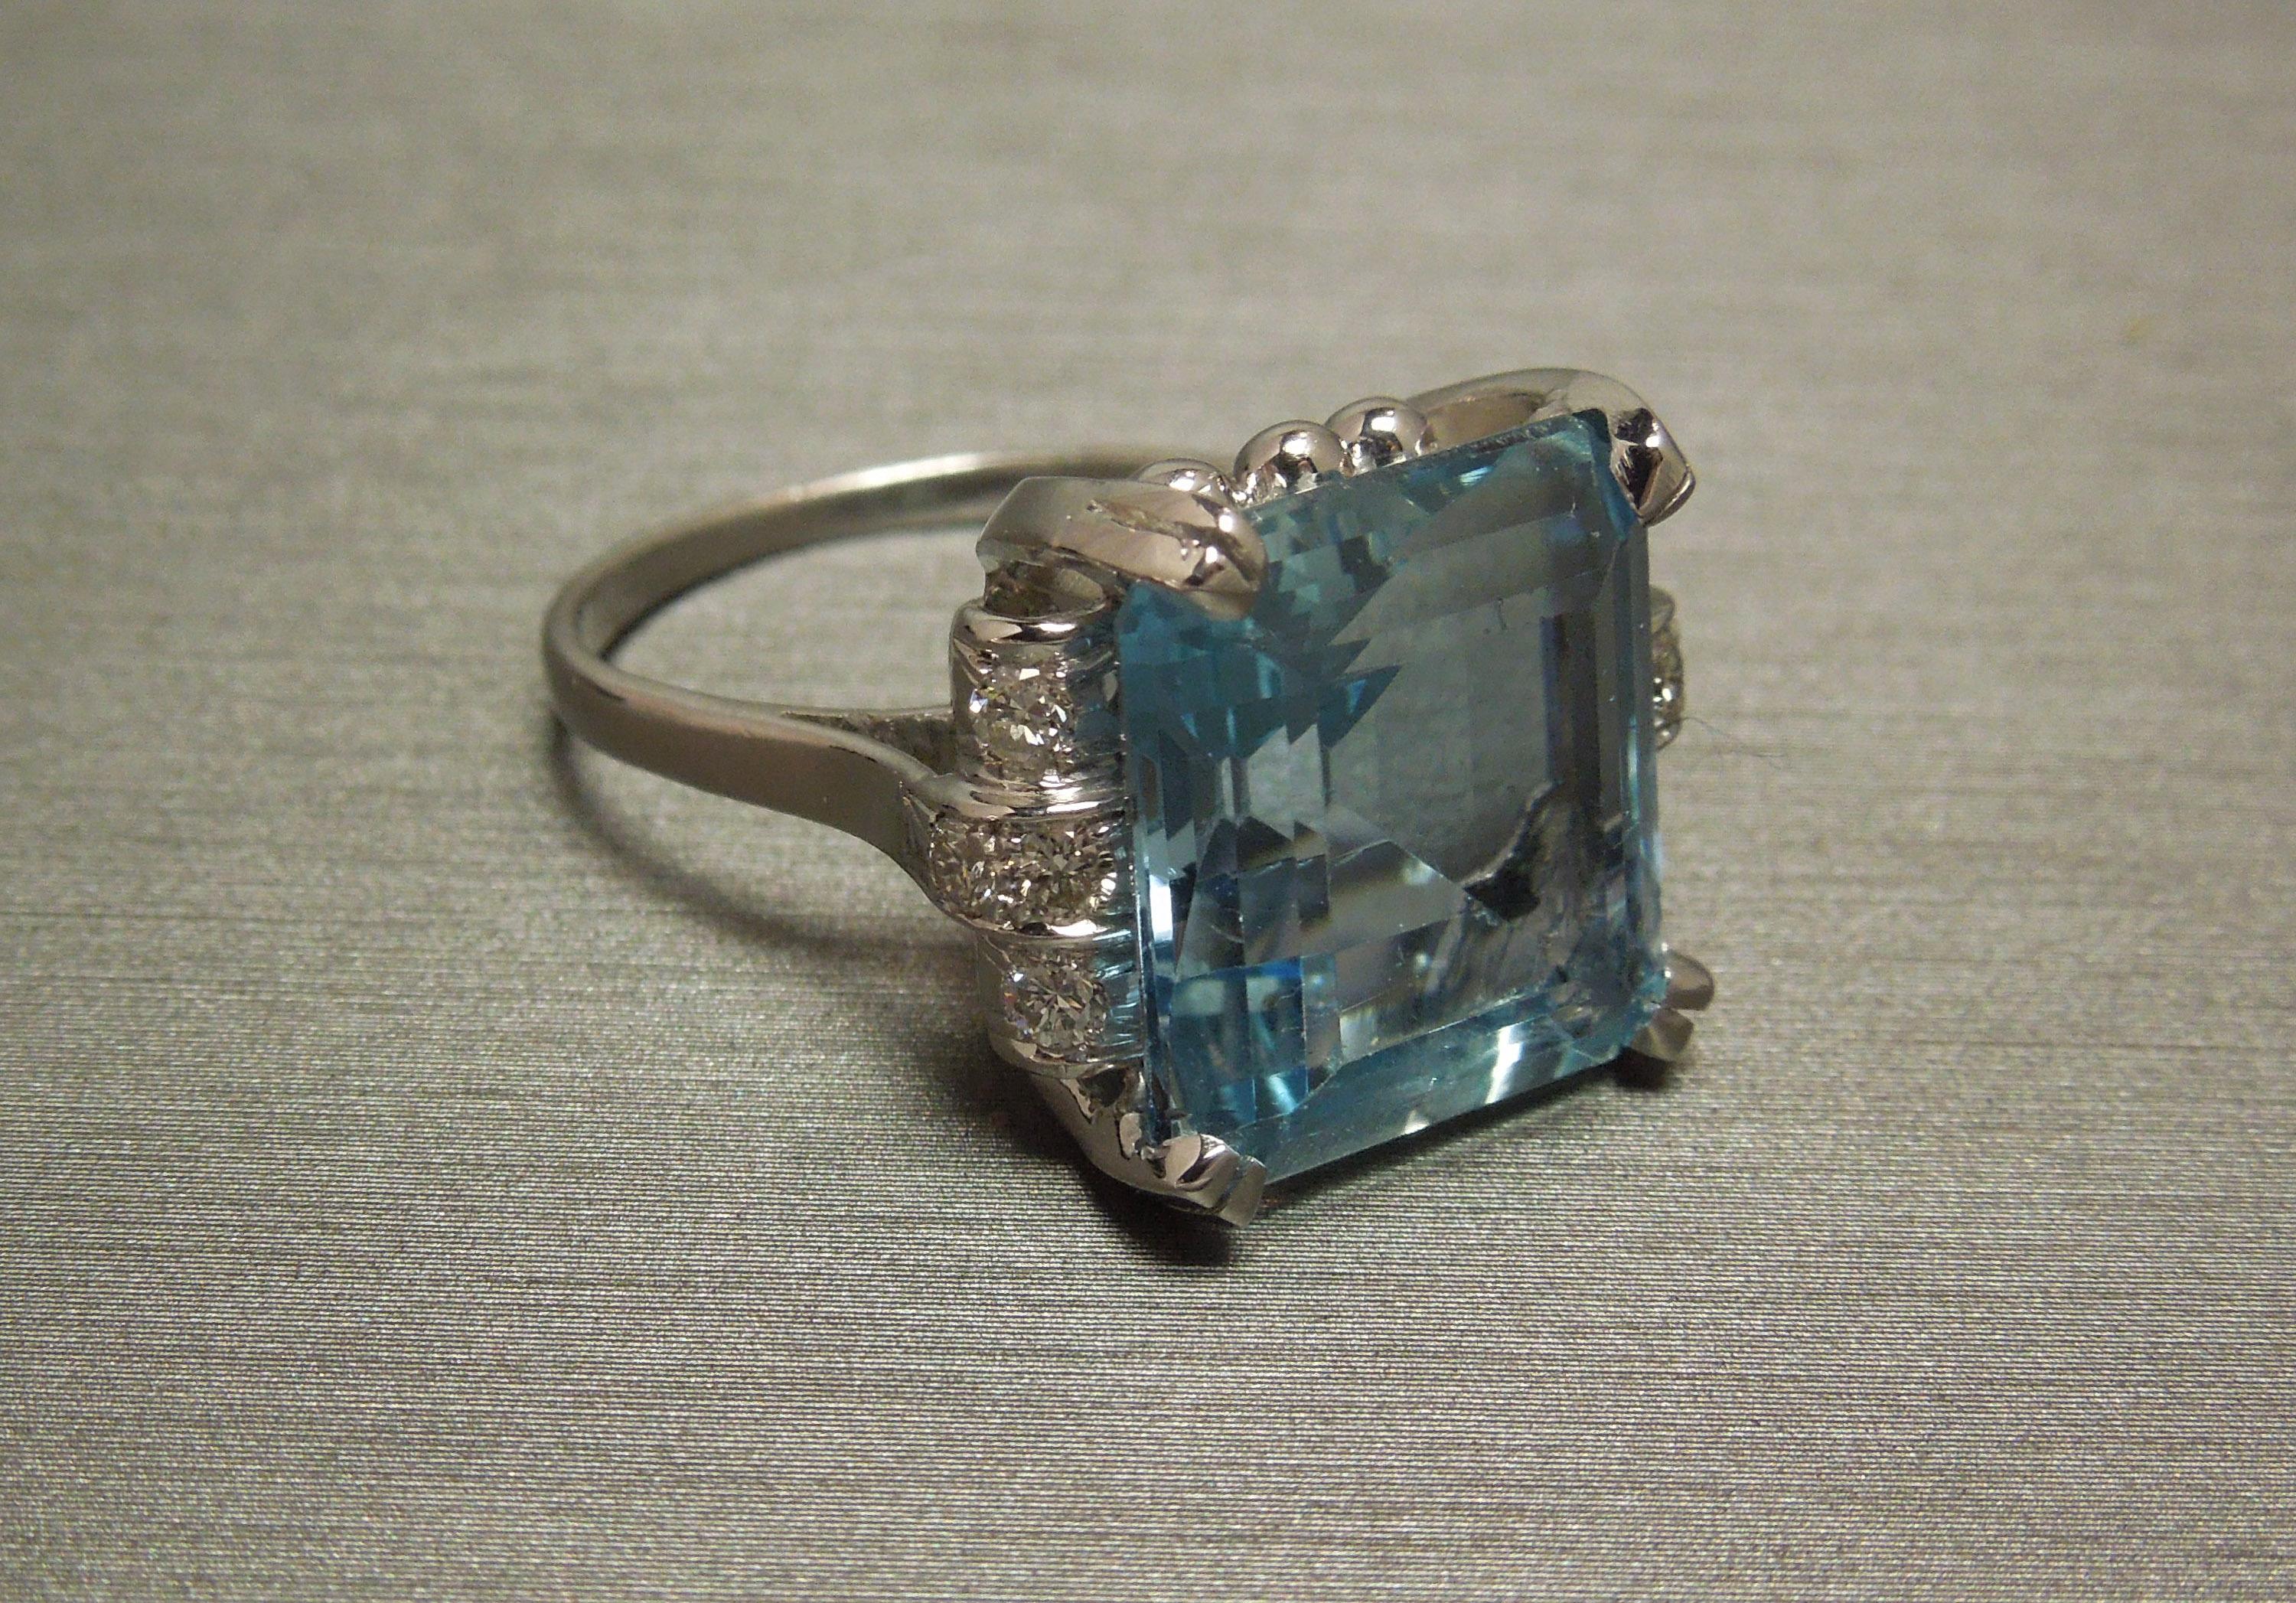 Constructed completely of Platinum, with 1 Focal G.I.A. Certified Octagonal Square cut Natural Intense Blue 9.50 carat Aquamarine, at 14mm in length x 13mm in width, securely set in four Platinum prongs. With a total of 8 Colorless Nearly Flawless